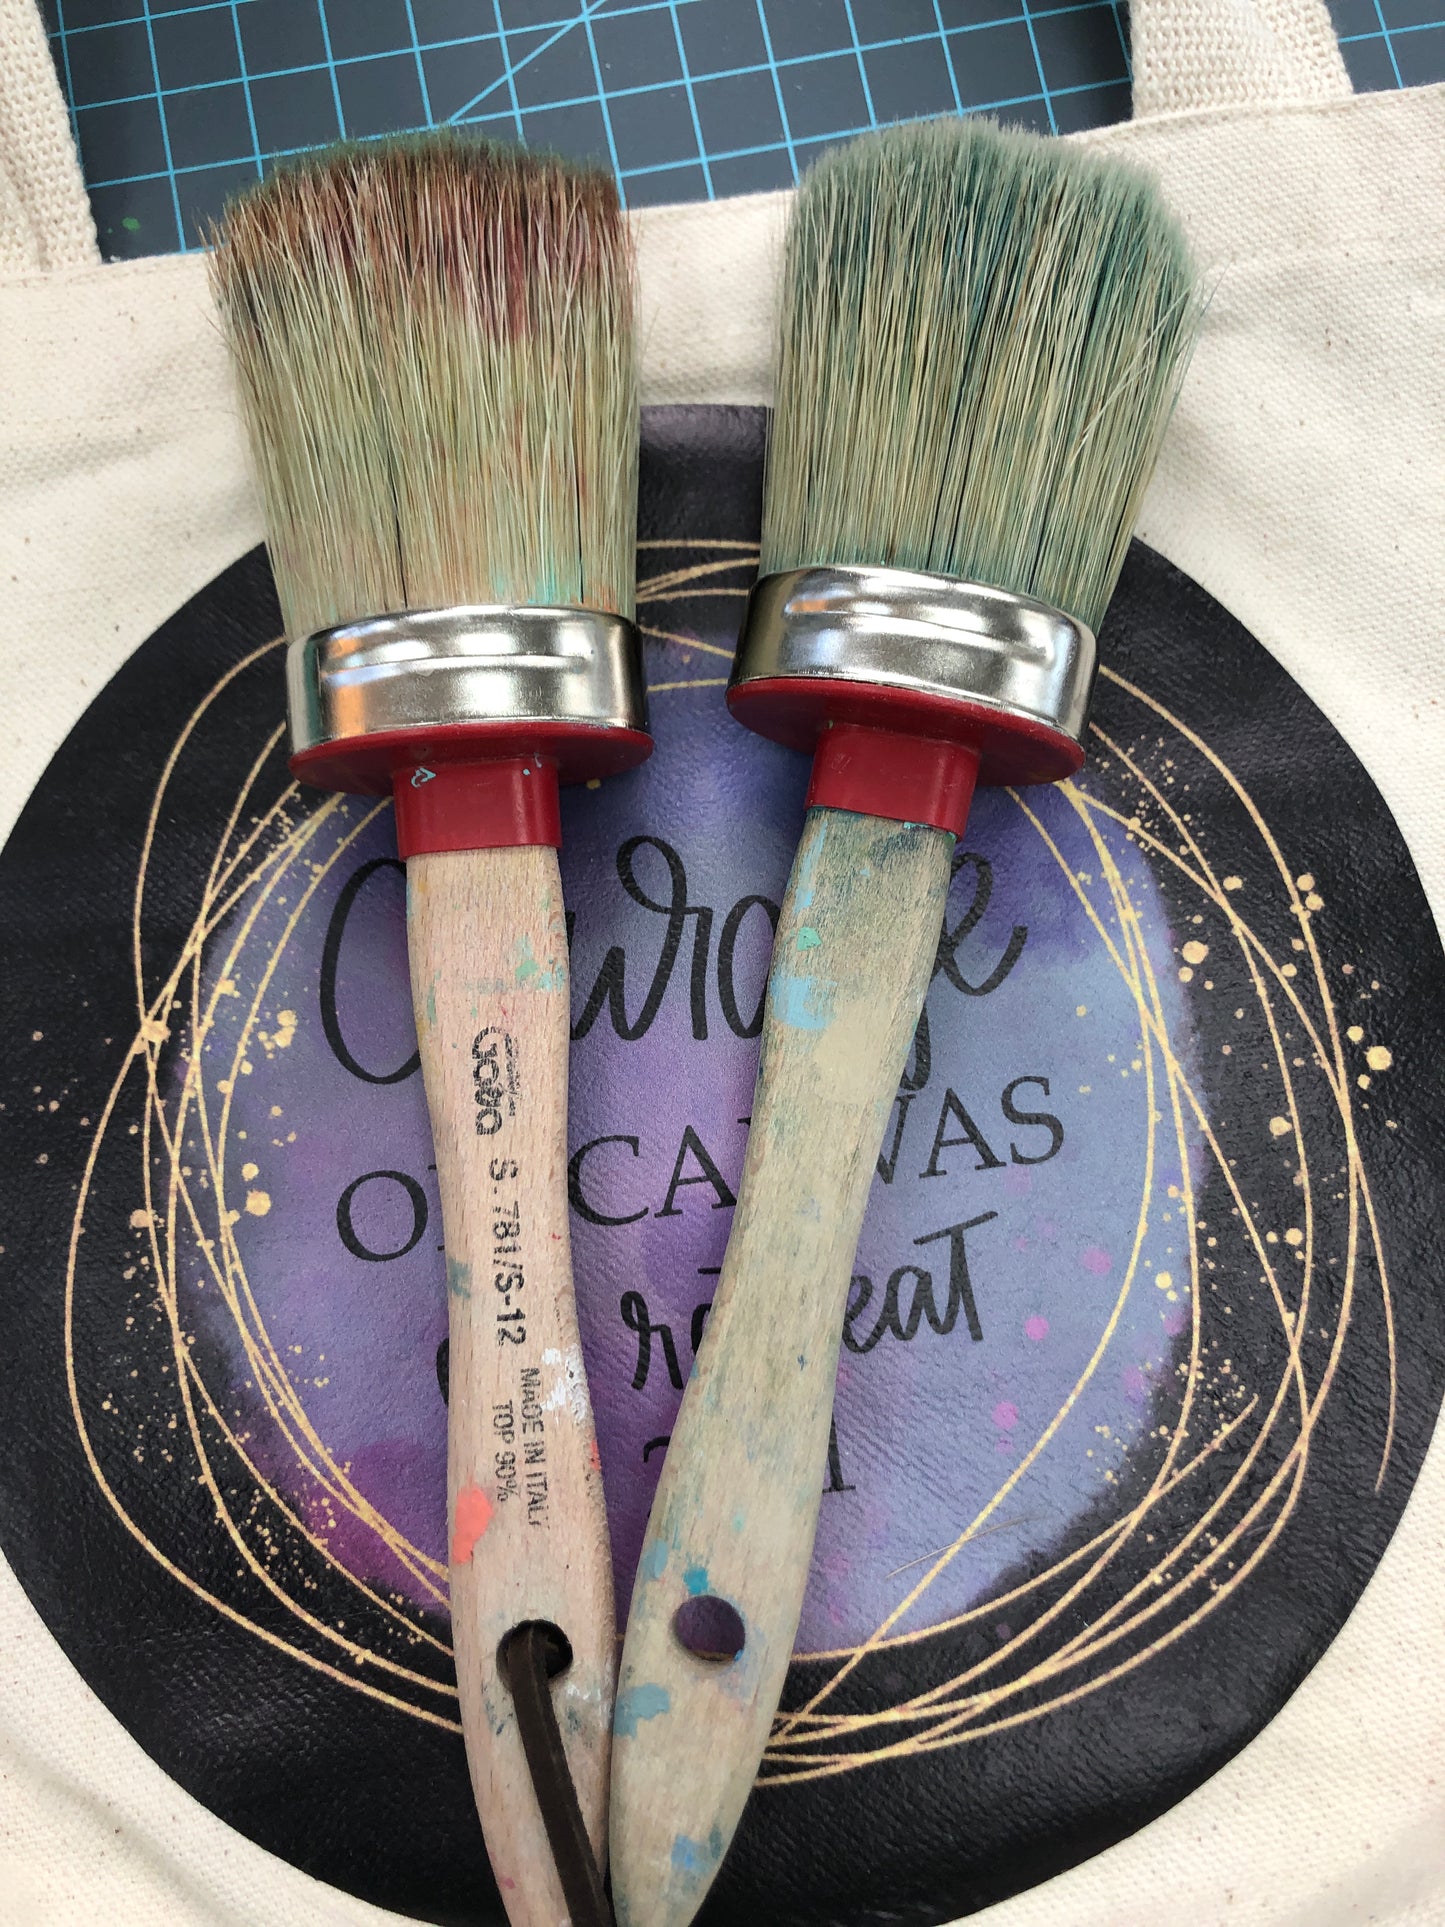 Pre-Owned Chalk Paint Brushes, $3 each any size